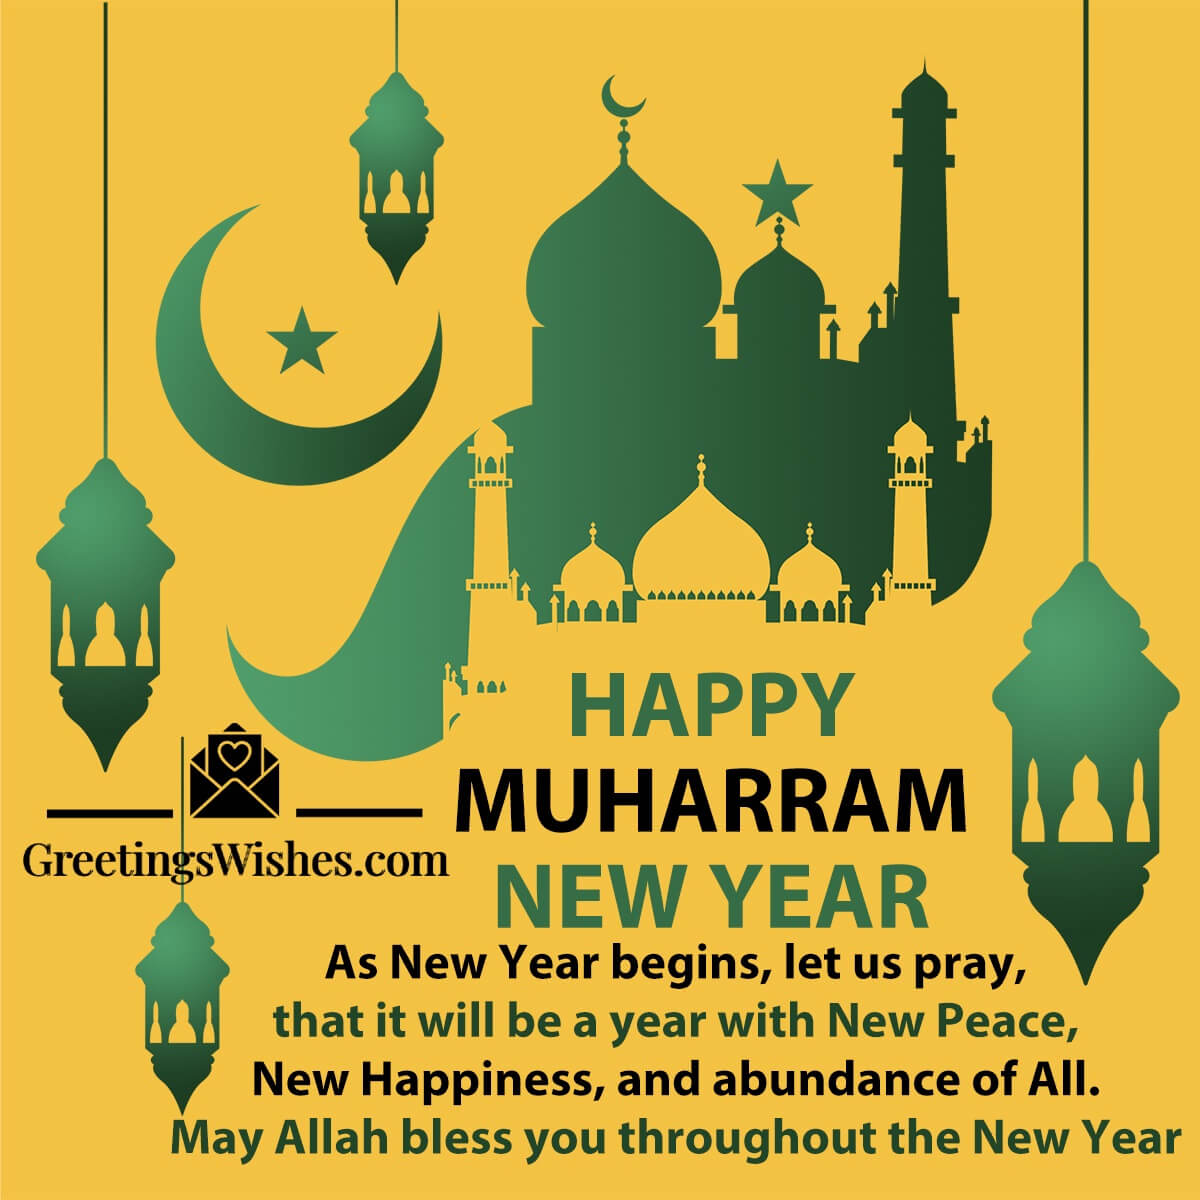 Happy Islamic New Year Blessings